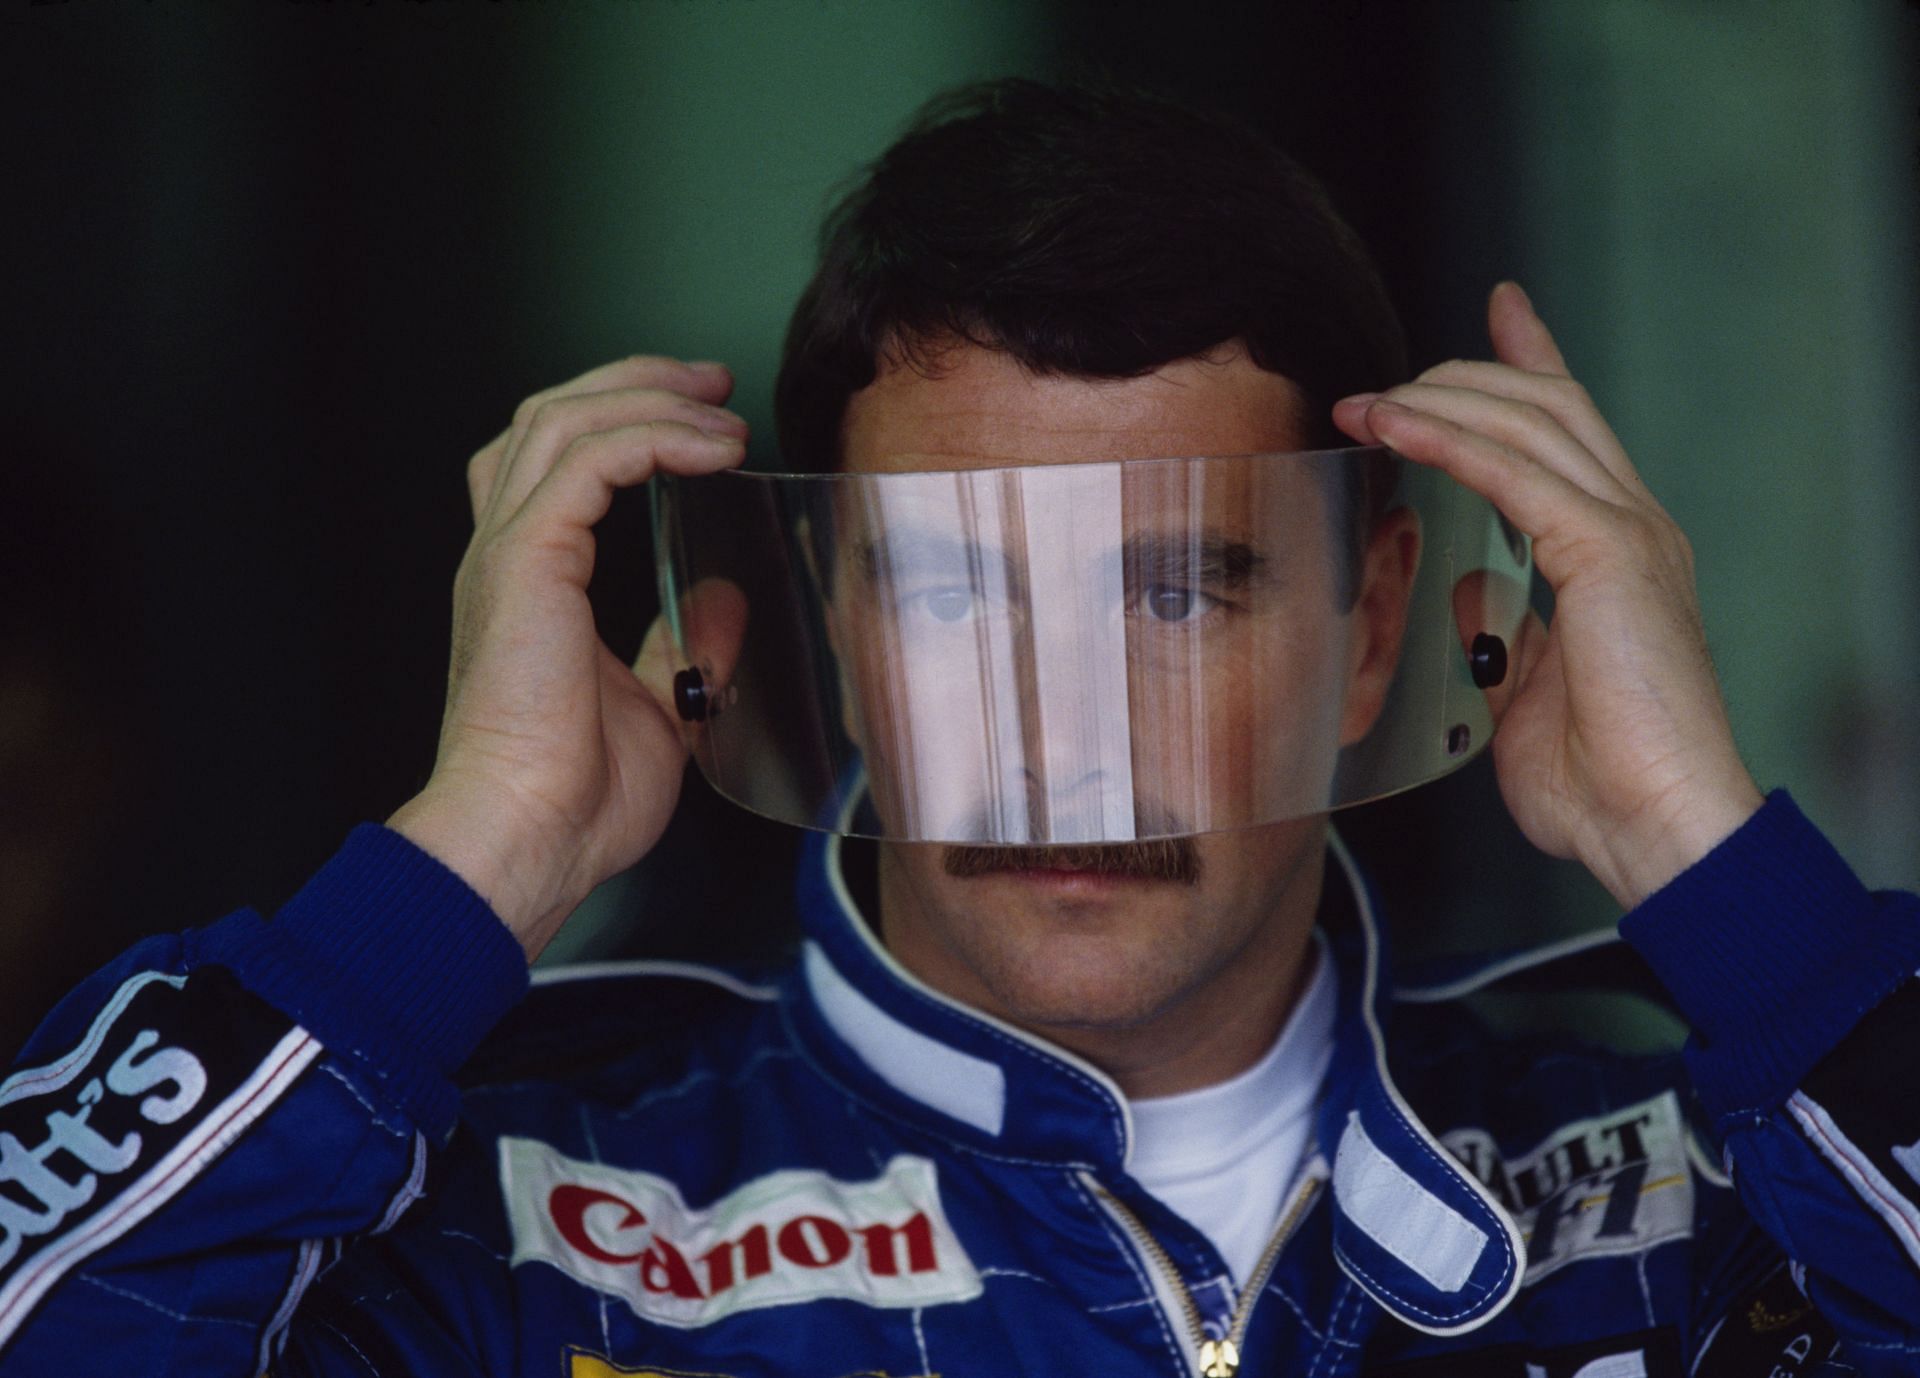 Nigel Mansell drove for Williams